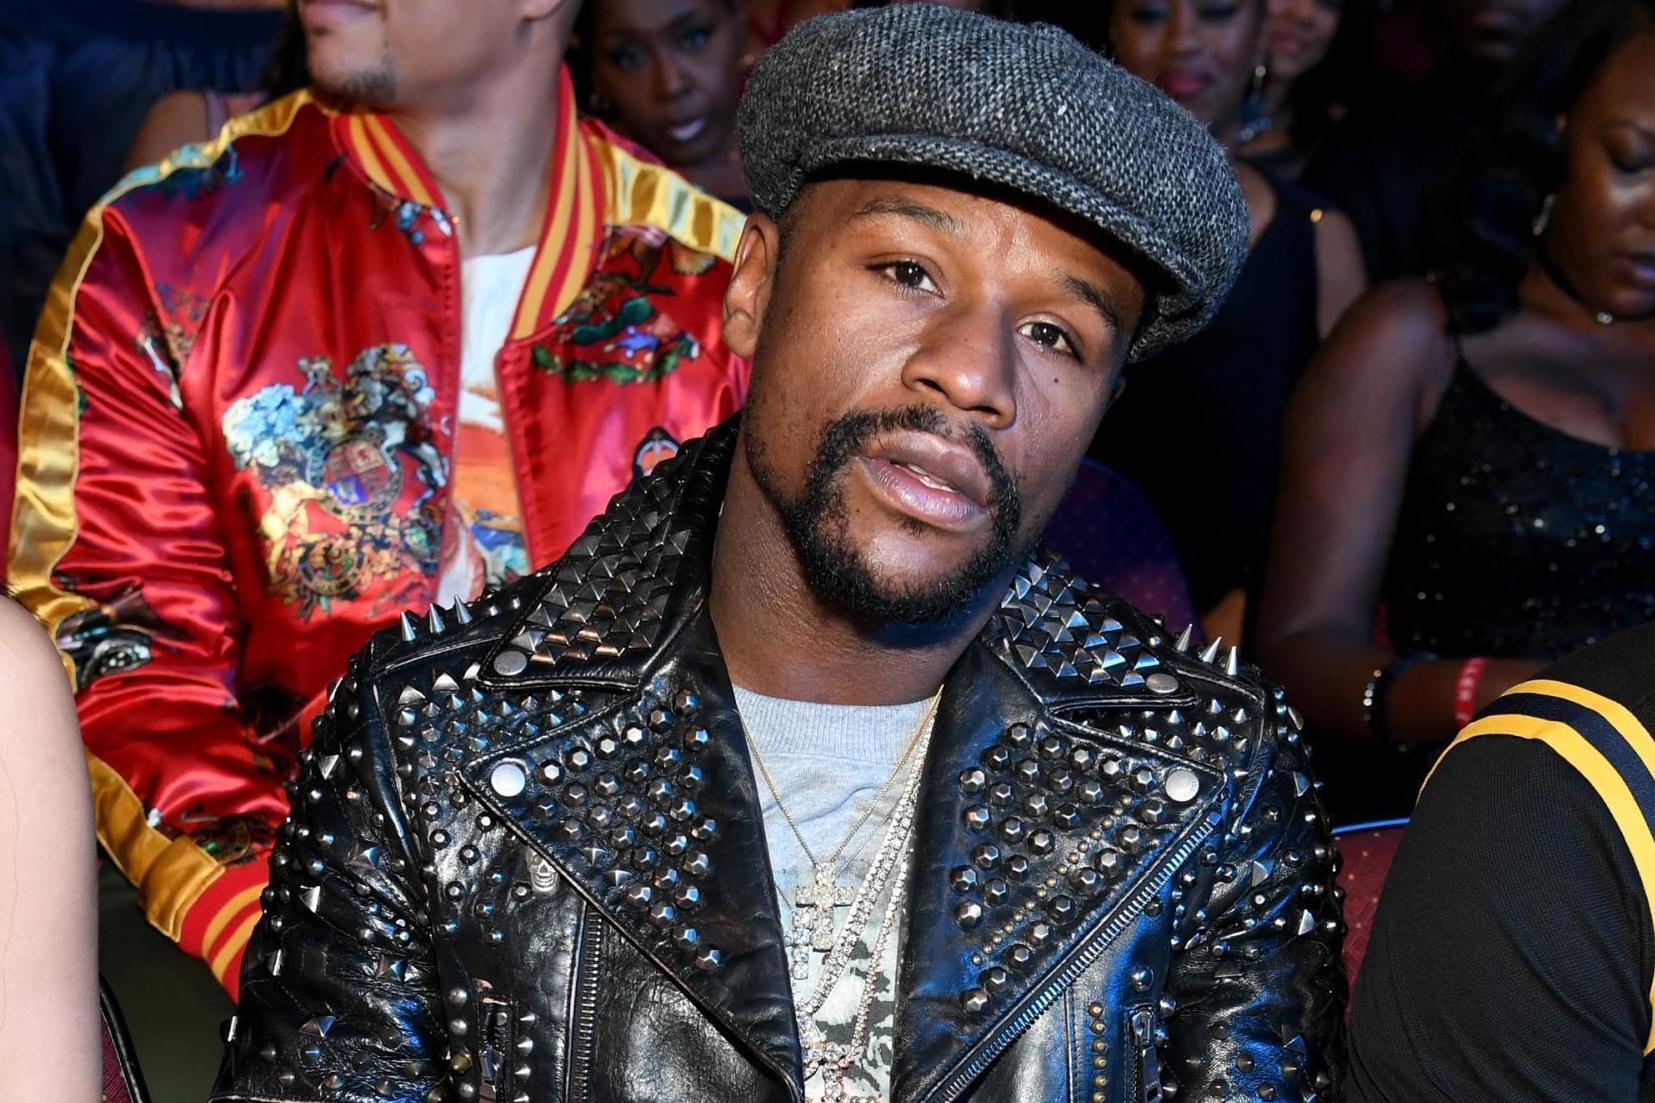 Floyd Mayweather supports Gucci following blackface controversy (Getty)